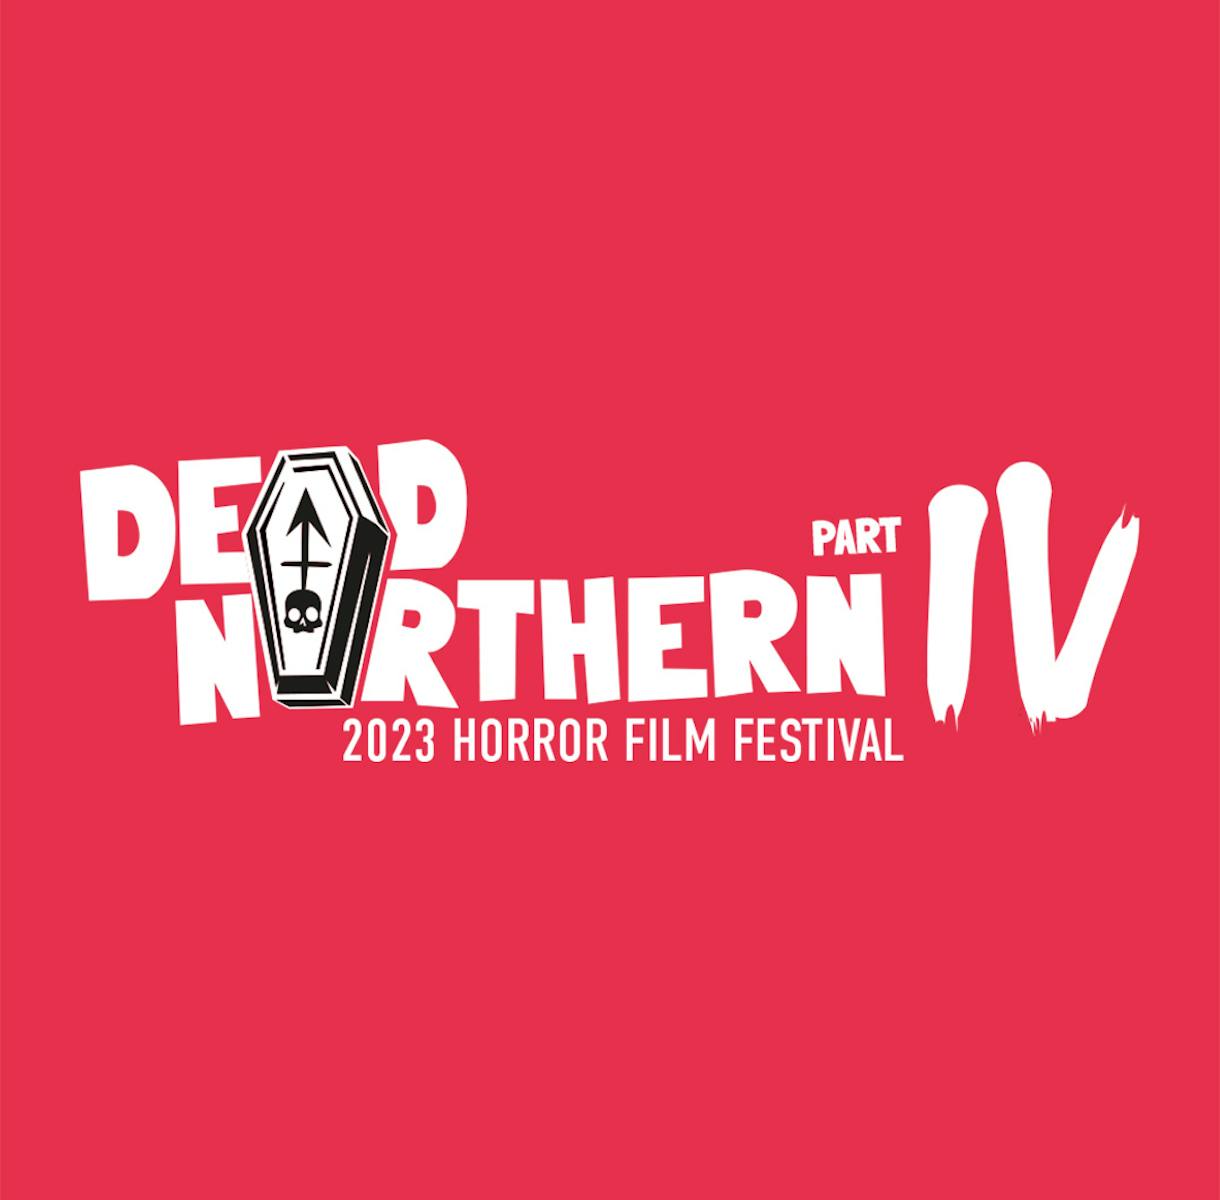 Dead Northern 2023